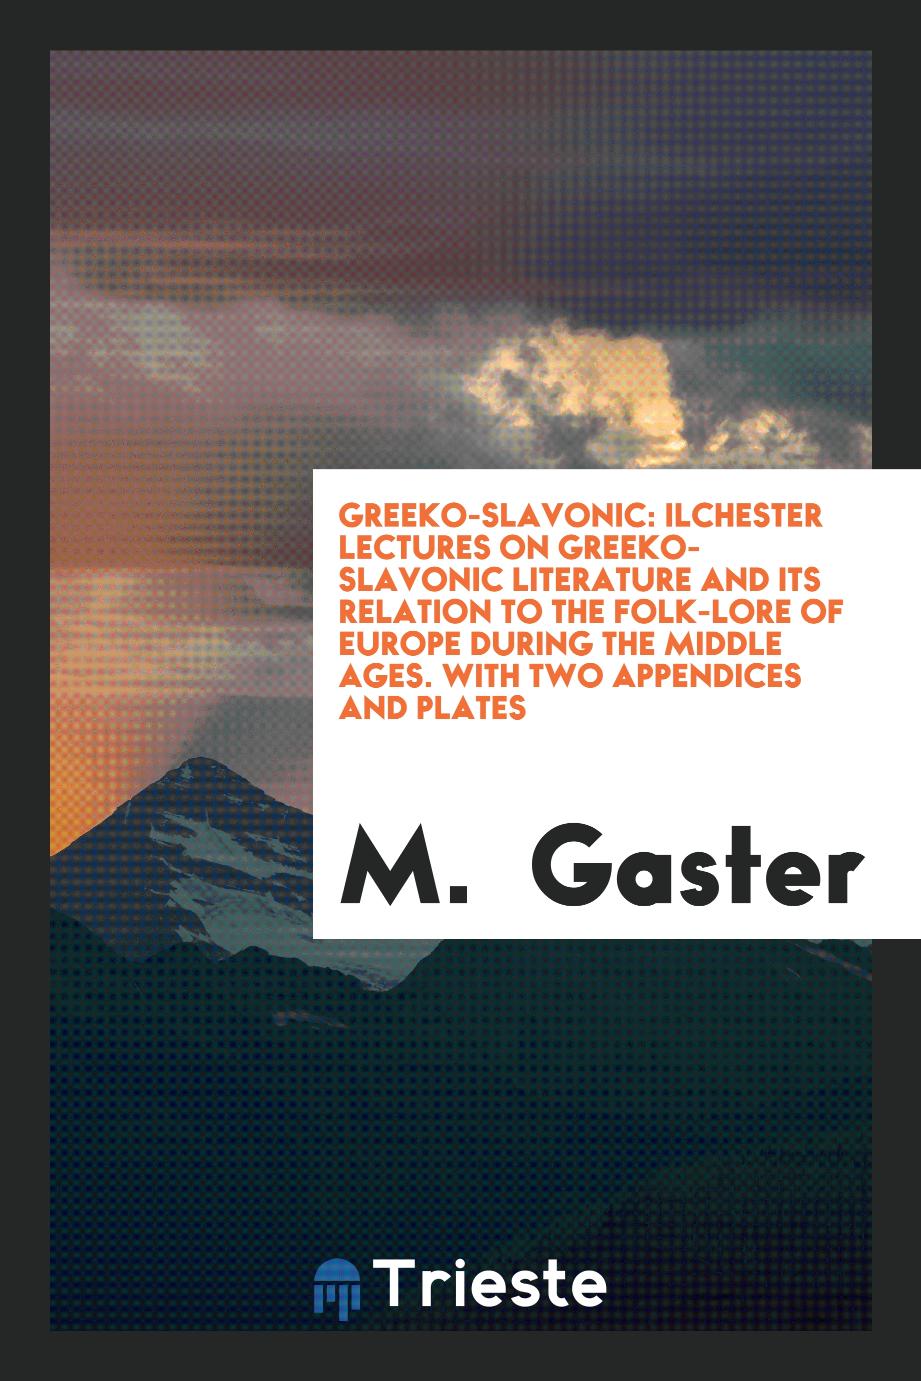 Greeko-Slavonic: Ilchester Lectures on Greeko-Slavonic Literature and Its Relation to the Folk-Lore of Europe During the Middle Ages. With Two Appendices and Plates